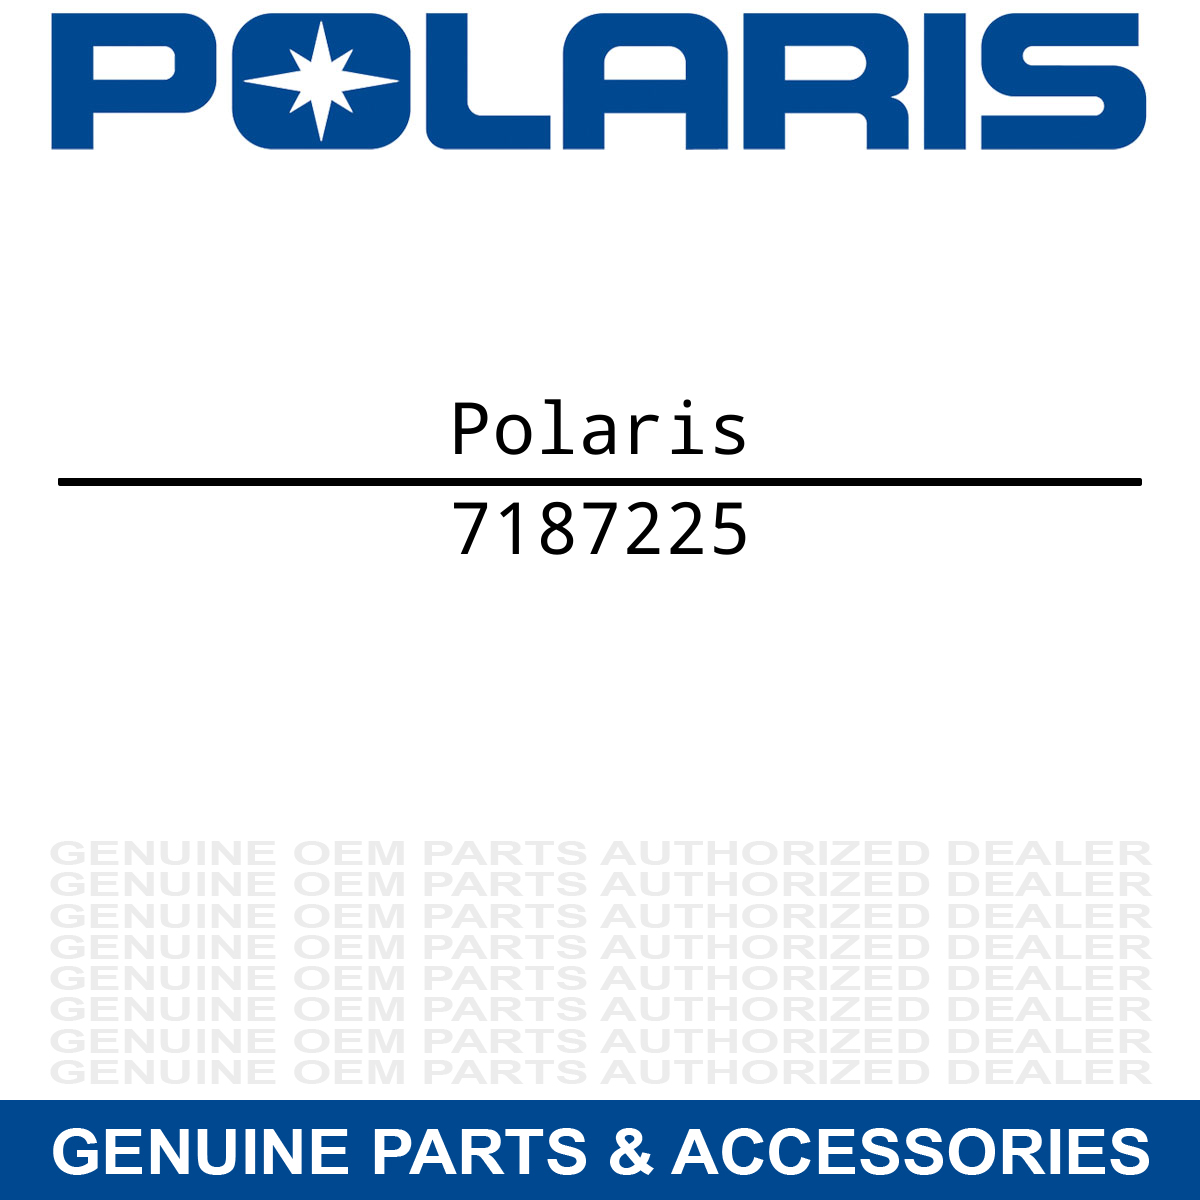 Polaris 7187225 Right Hand "137 LE" Tunnel Side Decal